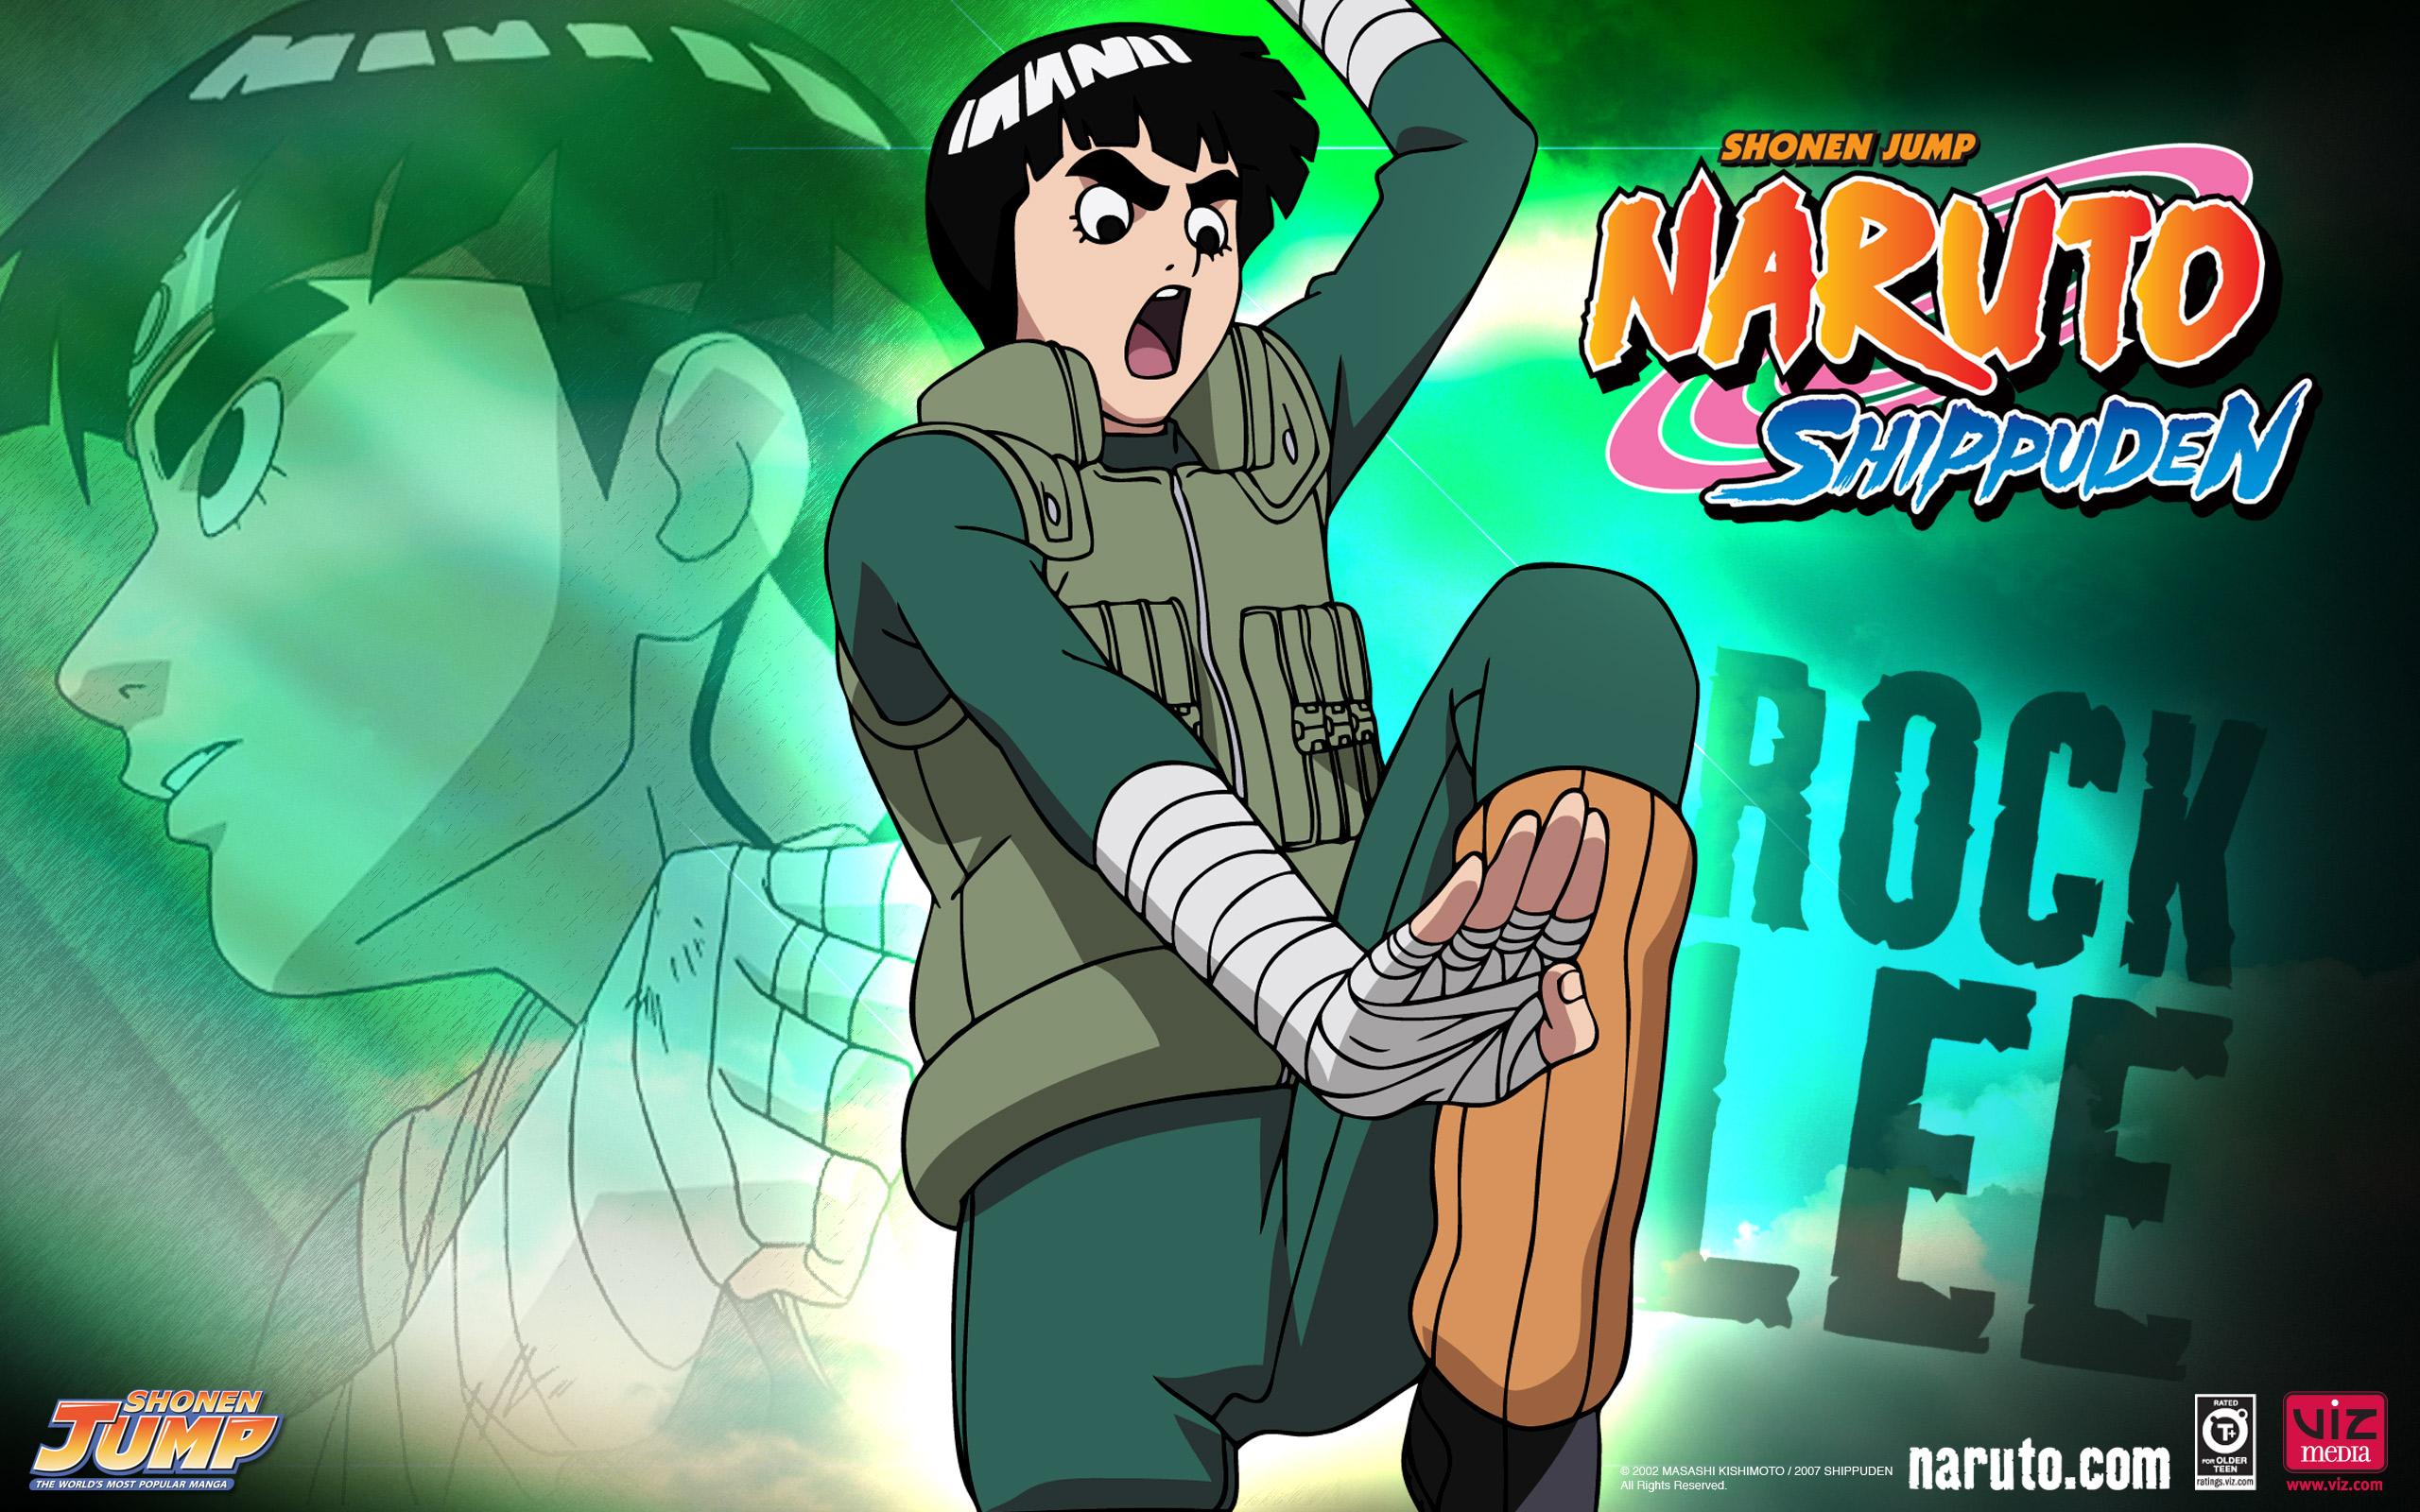 Anime character Rock Lee from Naruto, in a dynamic pose.